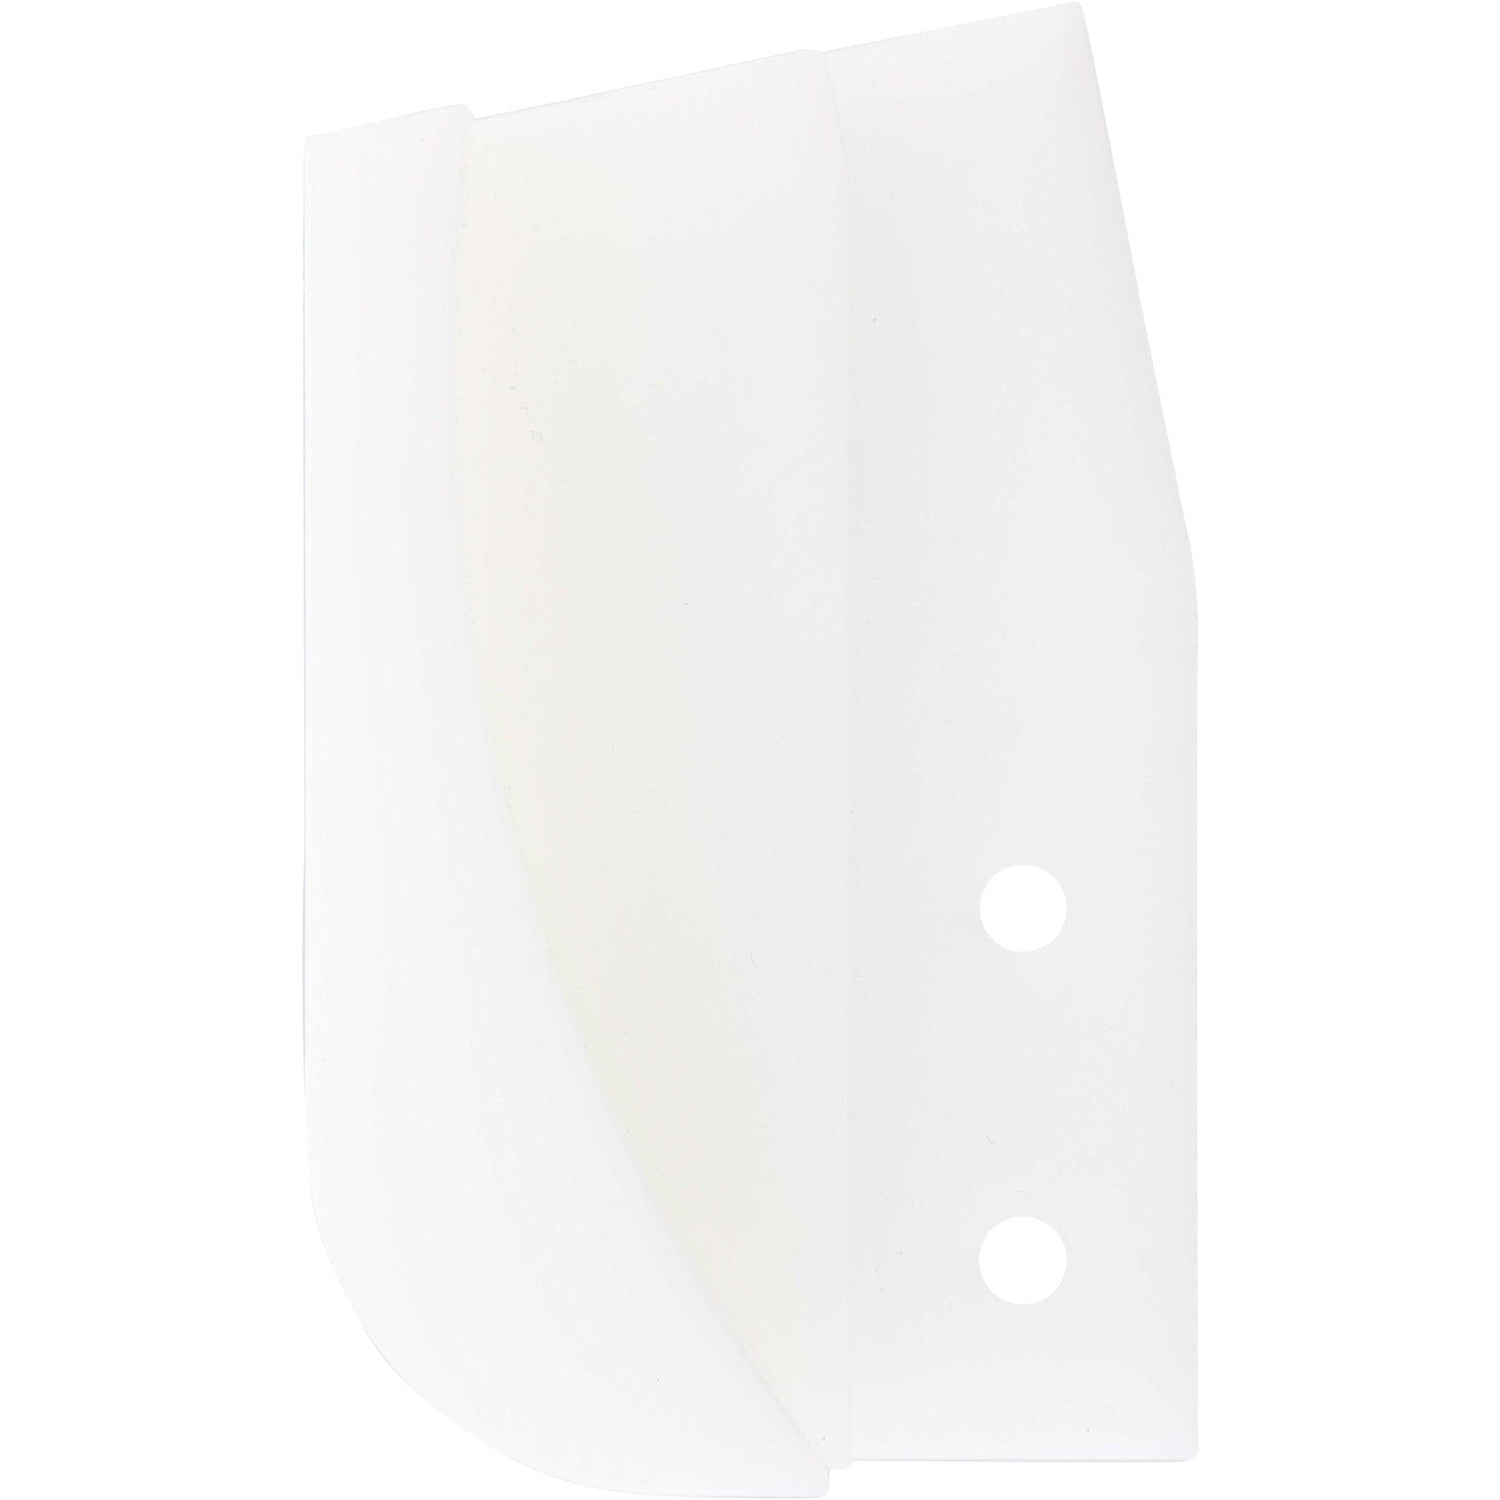 White plastic machined block with two holes used for pressed magnets. Part shown on white background.